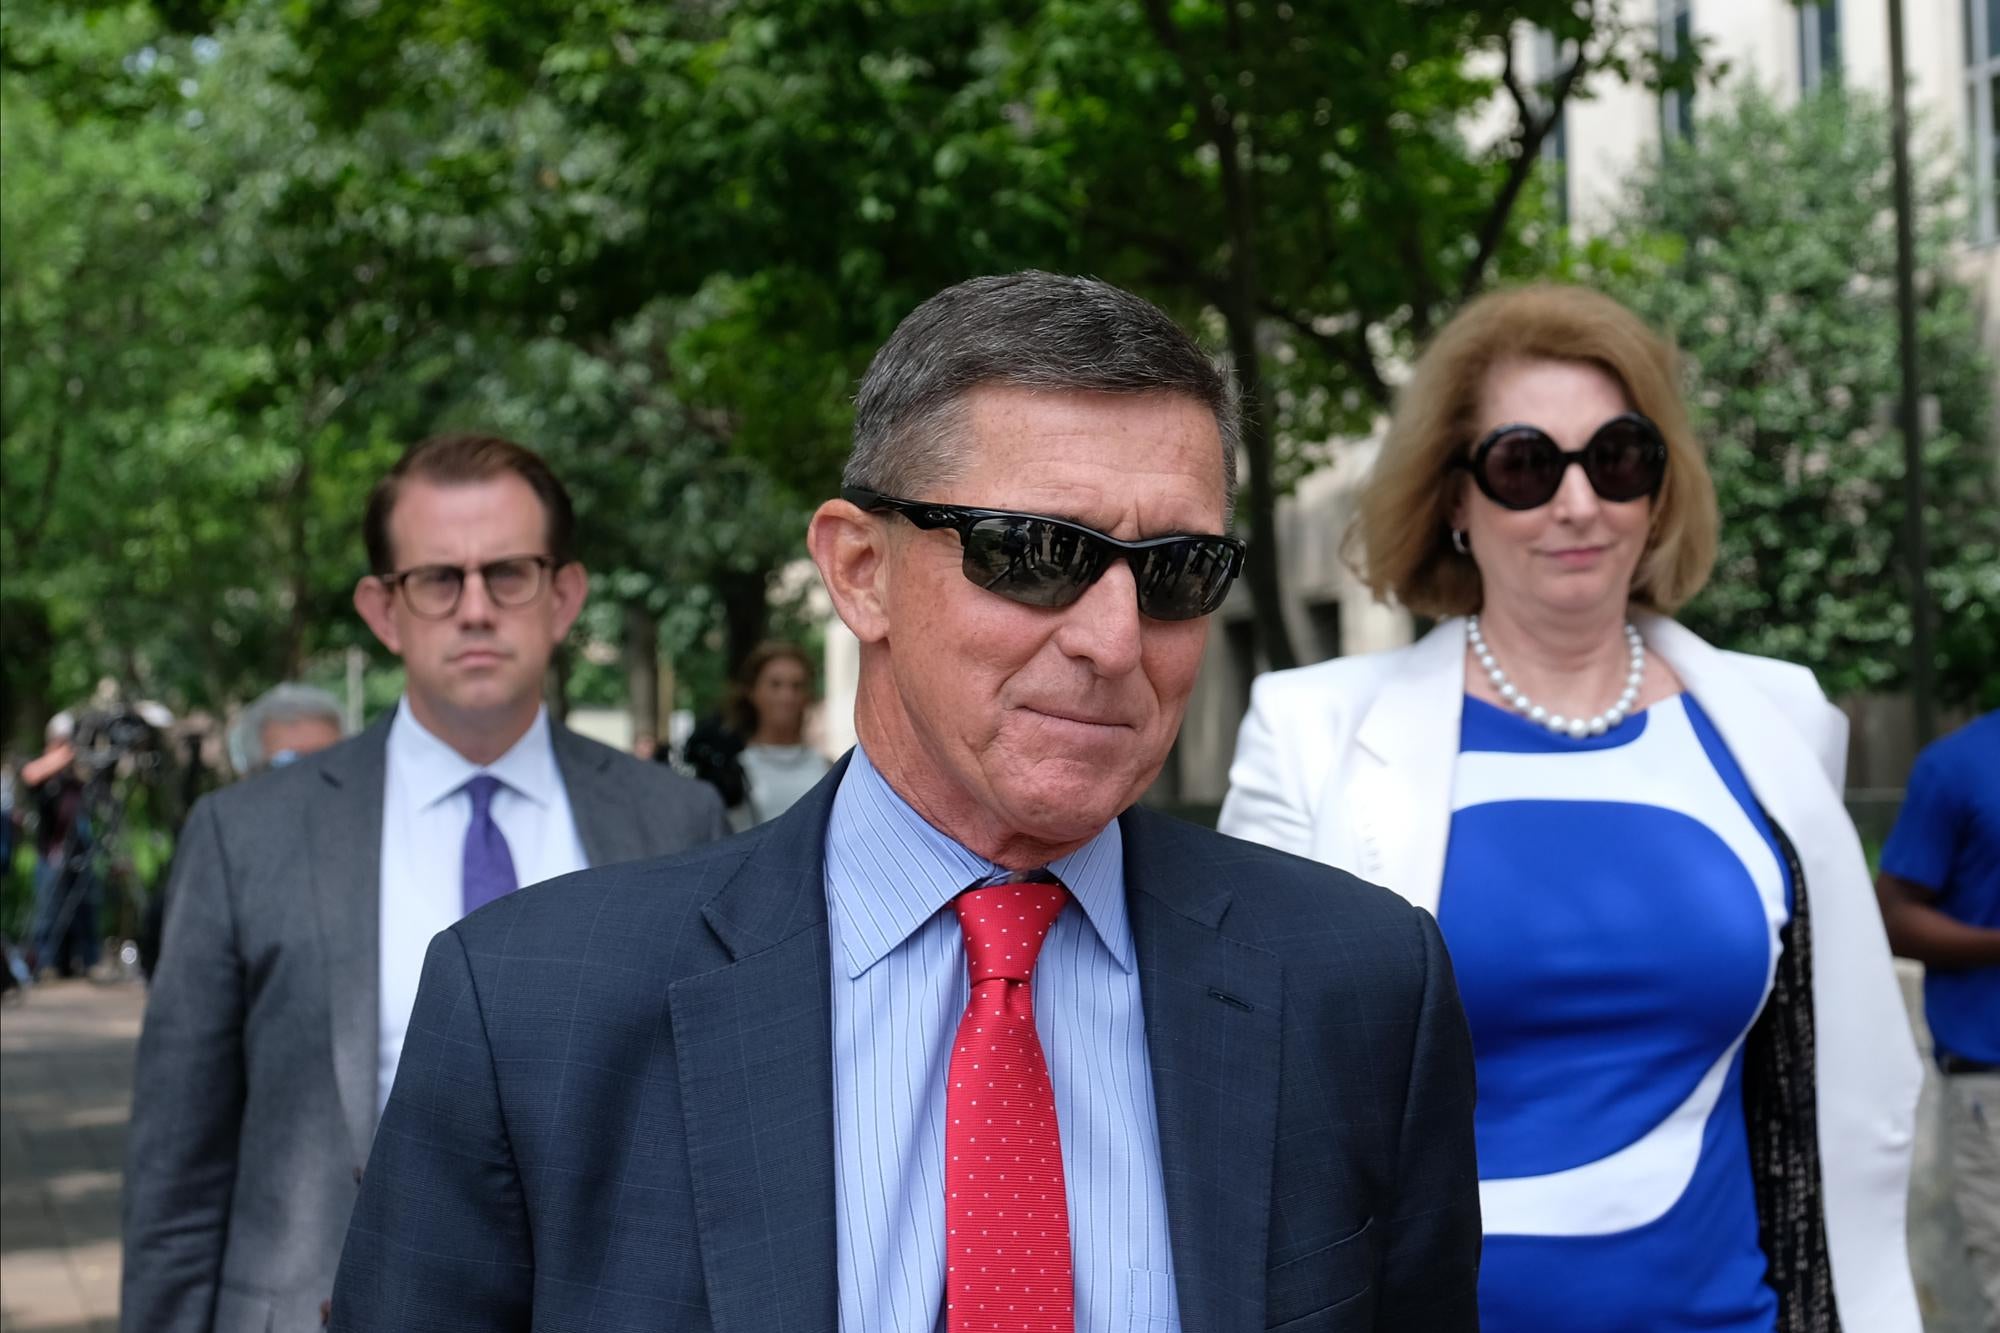 Michael Flynn, in sunglasses and a suit, walks with two people behind him.